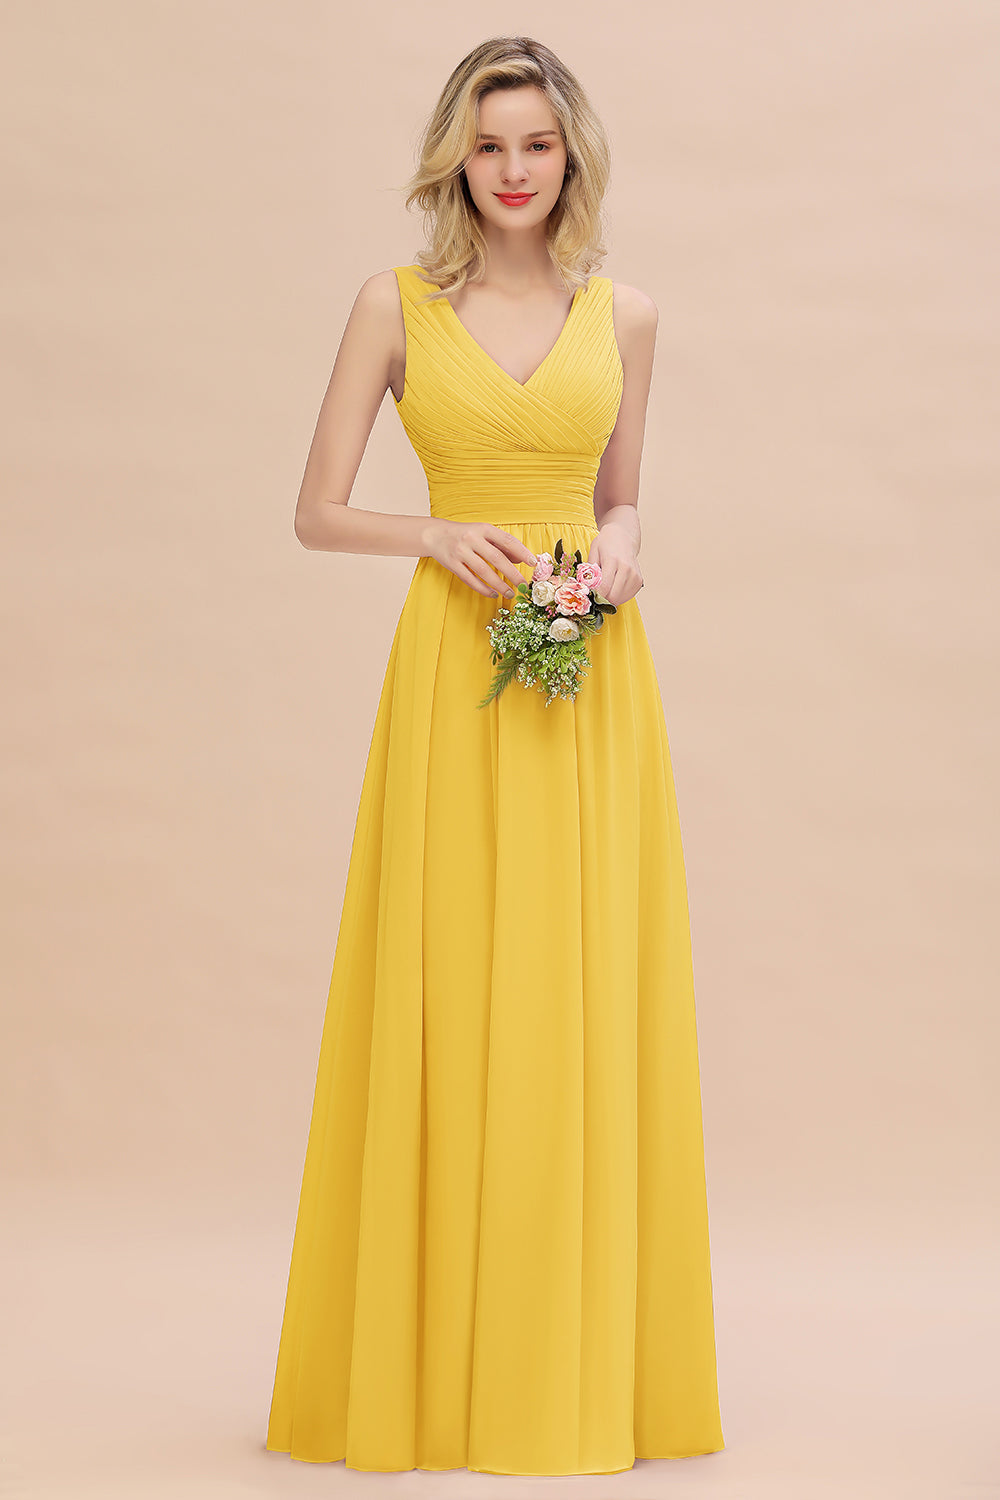 Load image into Gallery viewer, Elegant A-line V-Neck Long Bridesmaid Dress with Ruffles-BIZTUNNEL
